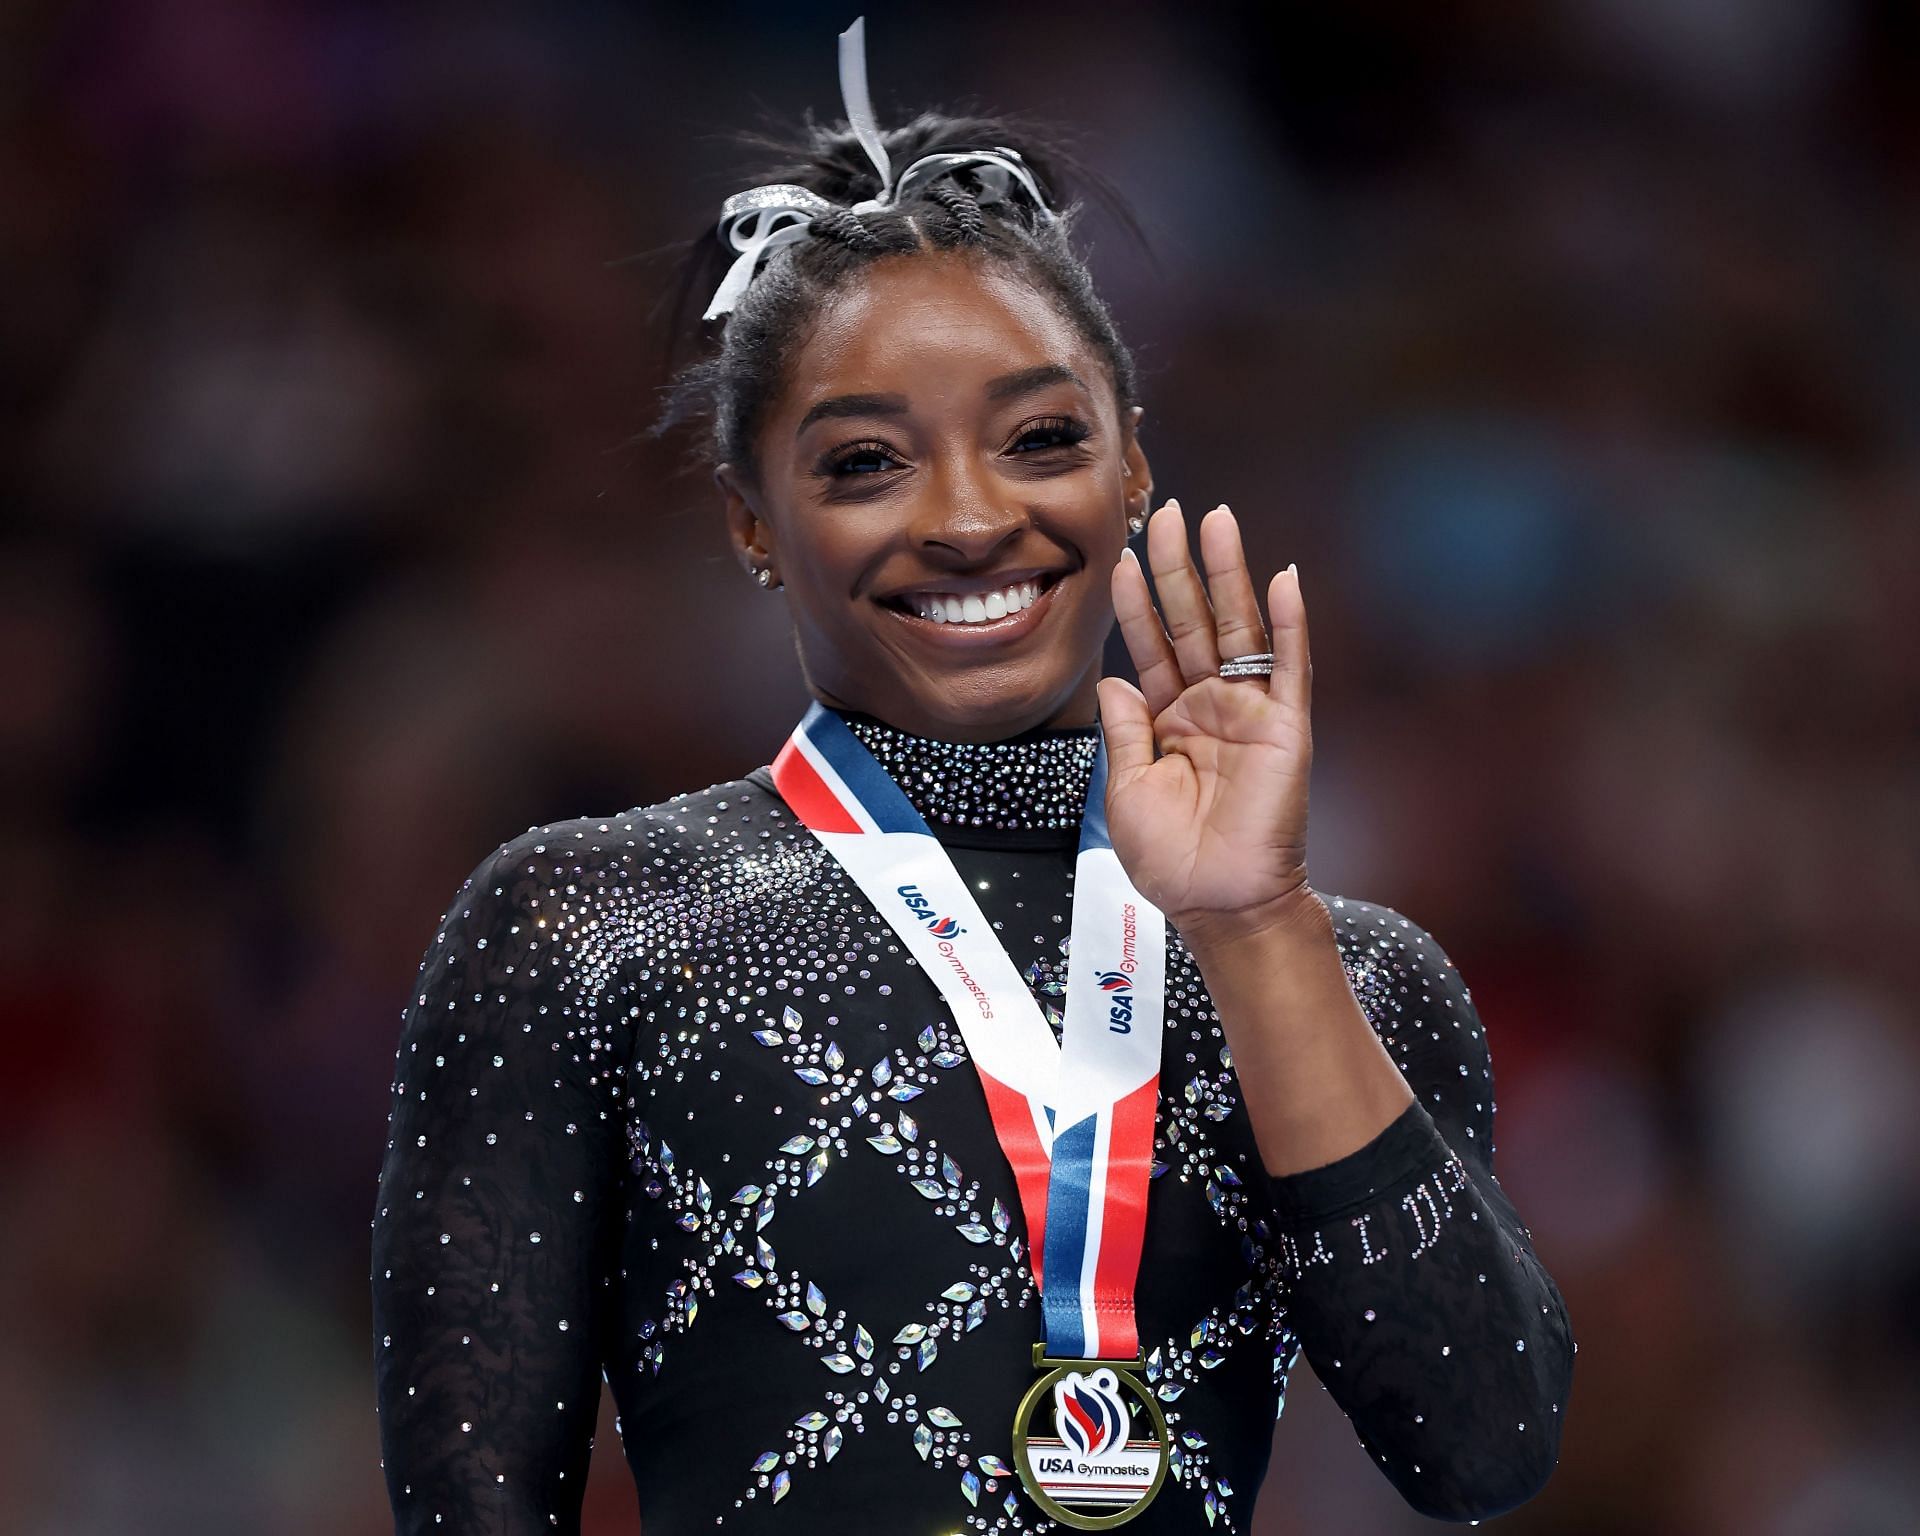 Simone Biles after placing first in the floor exercise competition at the 2023 U.S. Gymnastics Championships at SAP Centre in San Jose, California